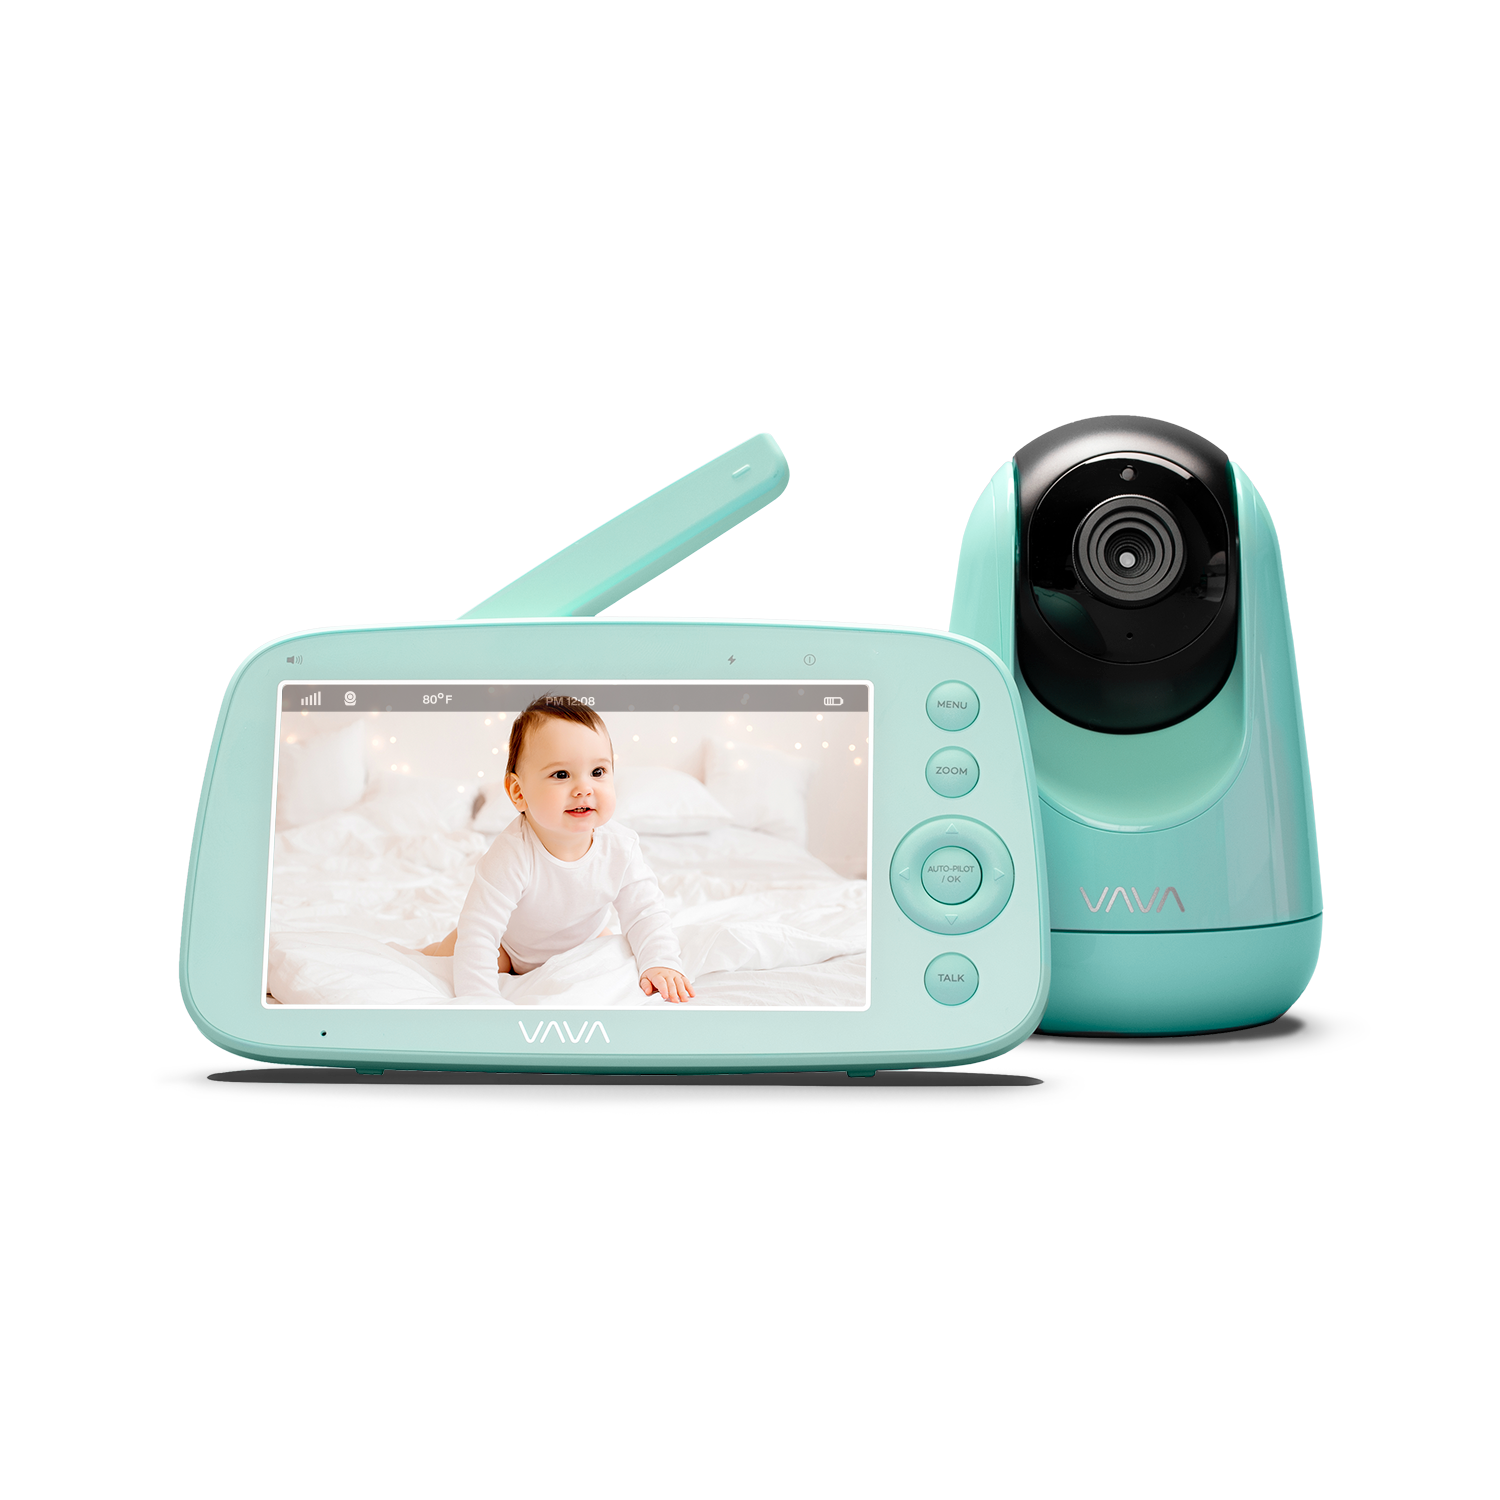 VAVA baby monitor and camera in green